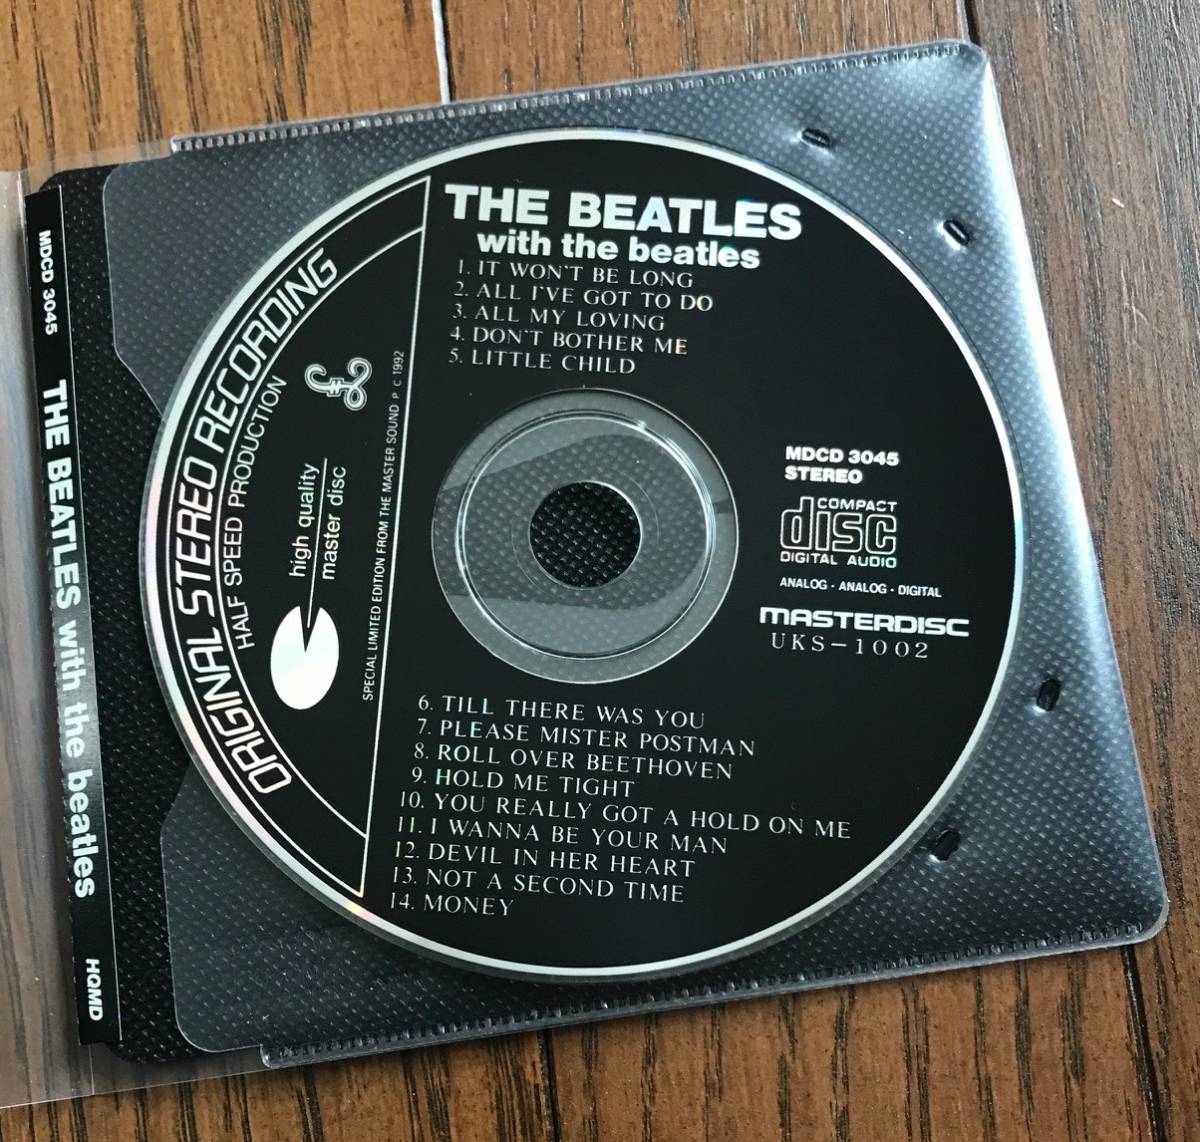 1674 / MASTERDISC / THE BEATLES / WITH THE BEATLES / STEREO / ORIGINAL STEREO RECORDING / 美品 / ビートルズ / _画像4